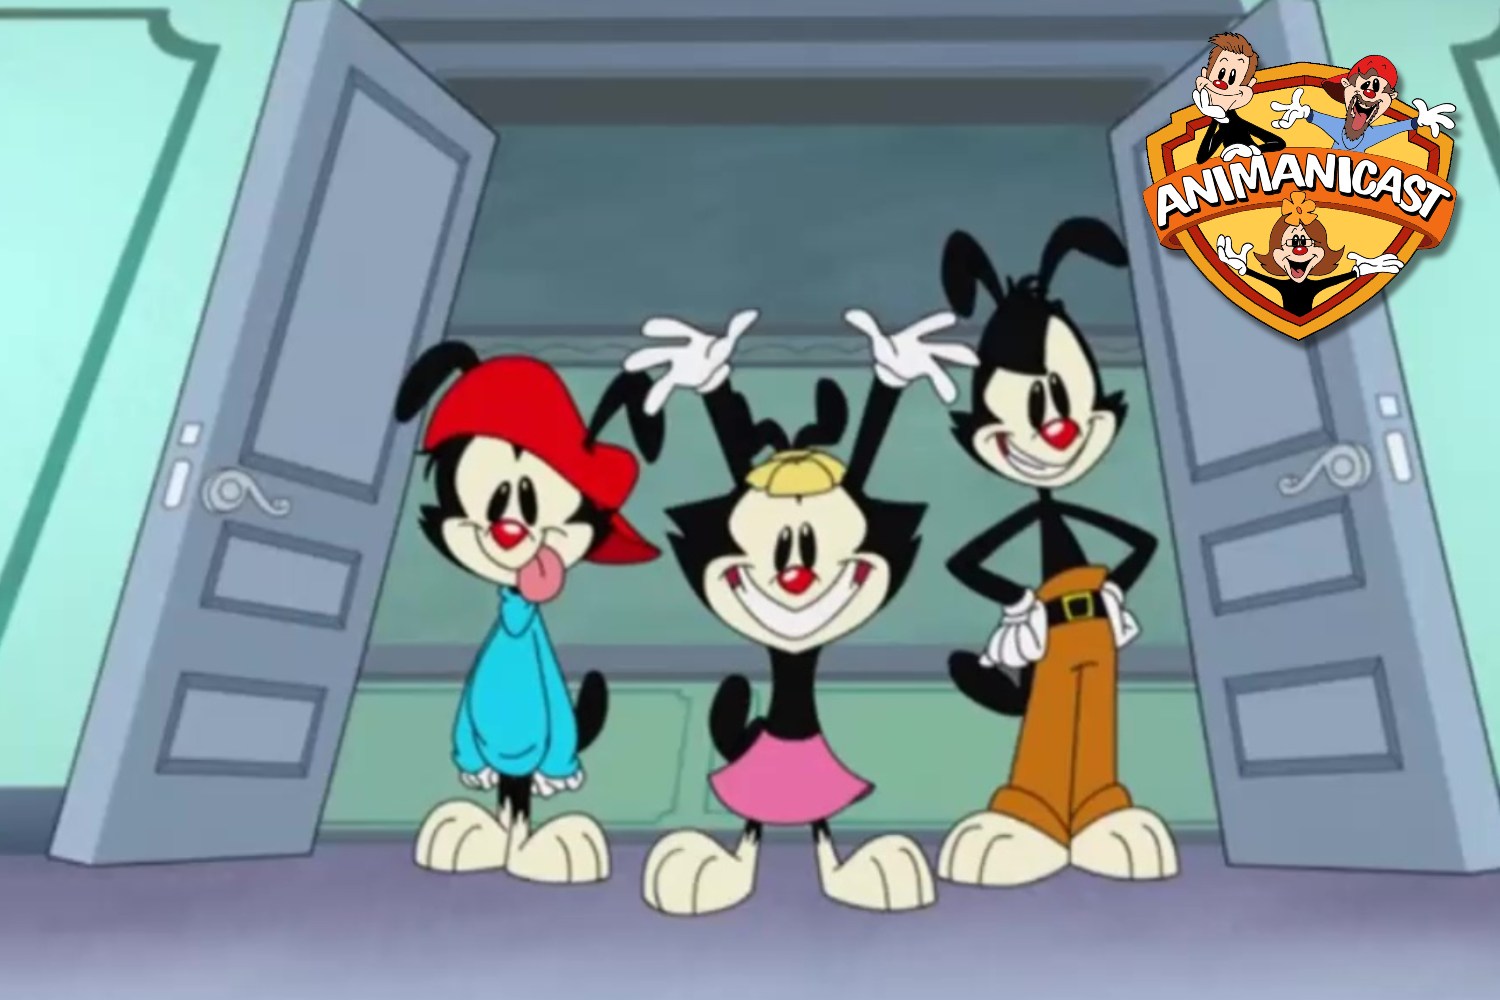 Animaniacs Reboot Episode 13 Review.